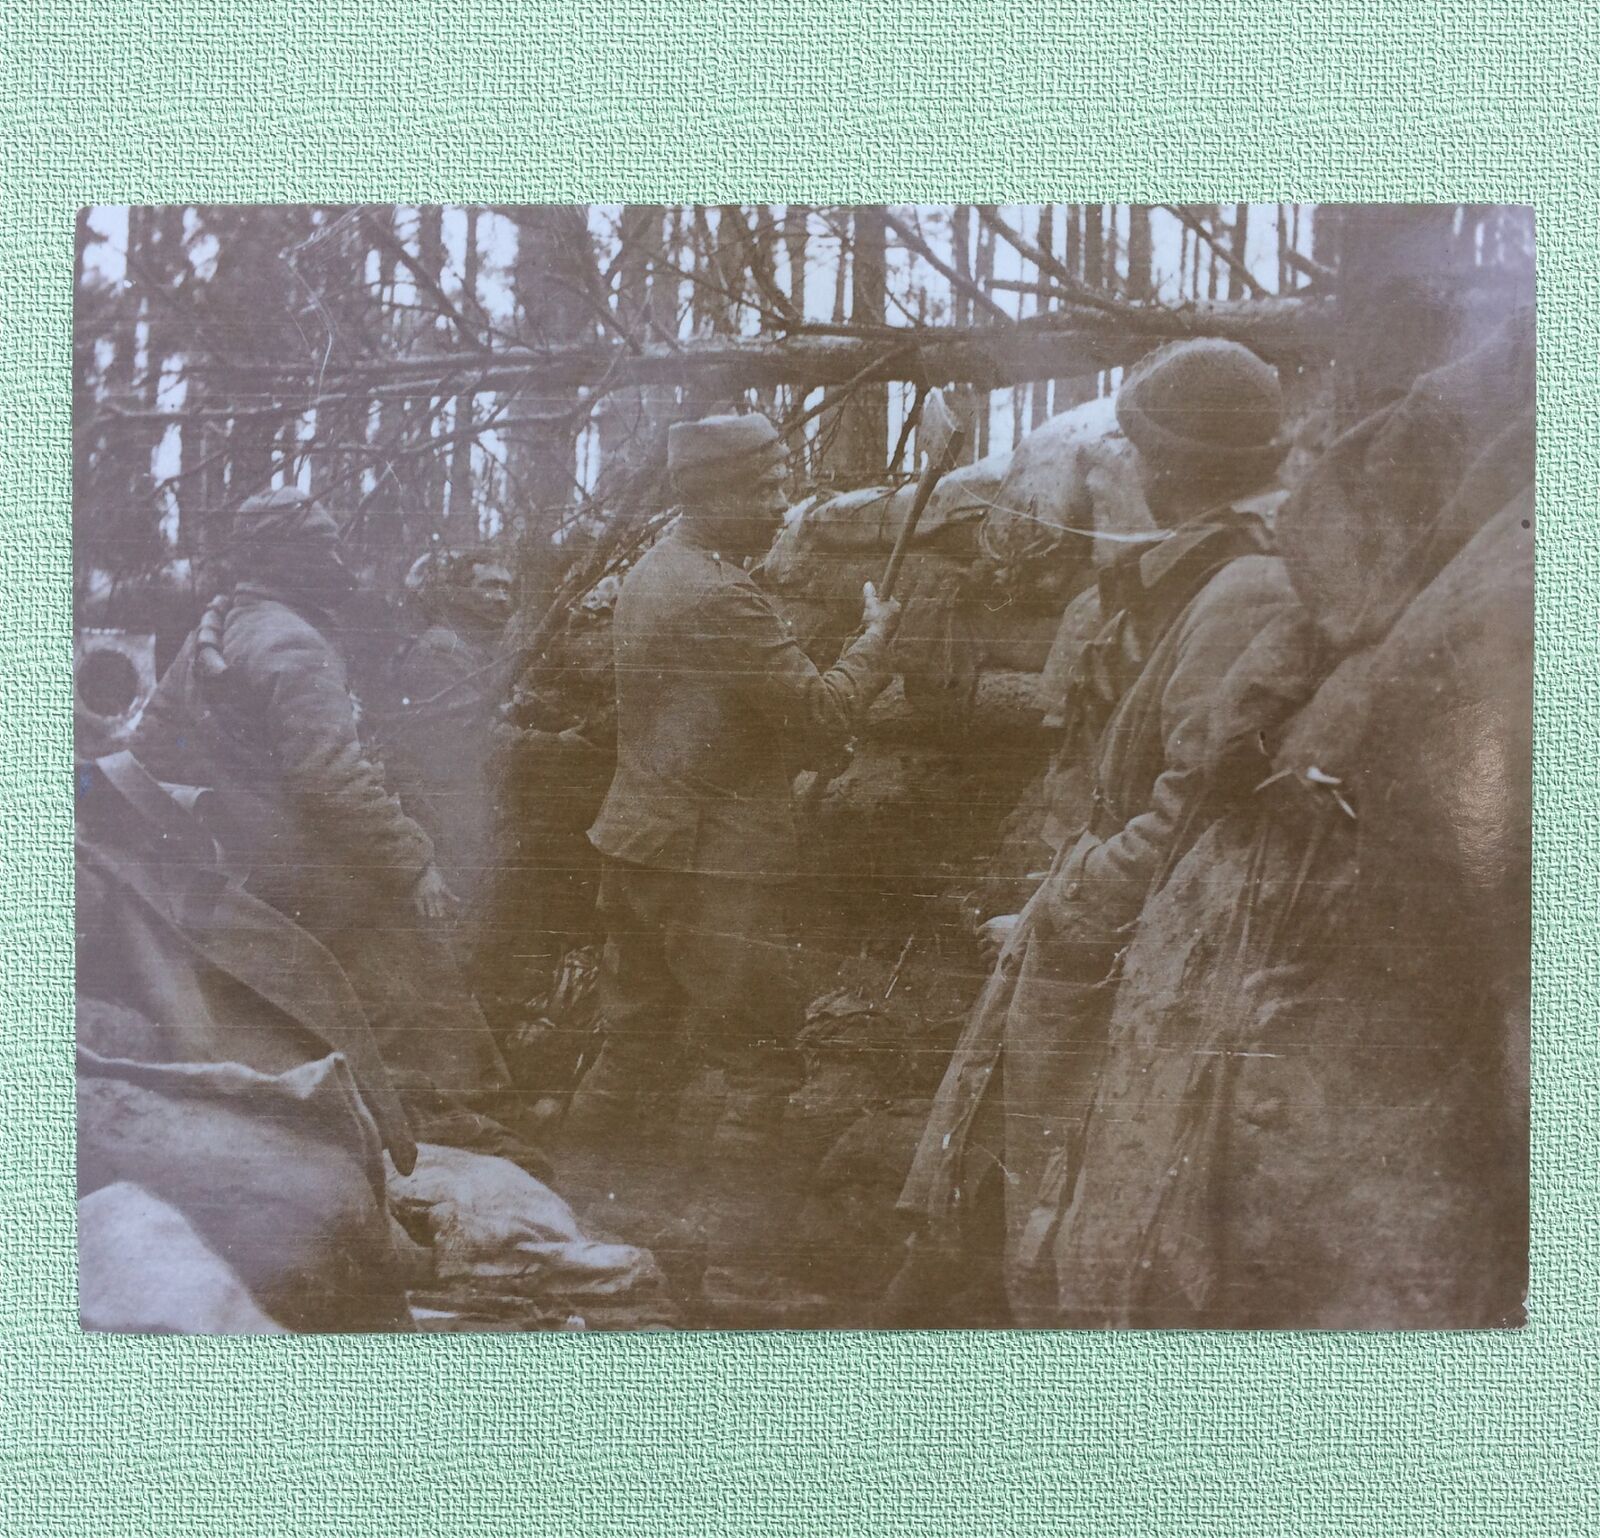 c1917 TYPE-1 PHOTOGRAPH OF WWI SOLDIERS WORKING IN TRENCHES AT THE FRONT LINES